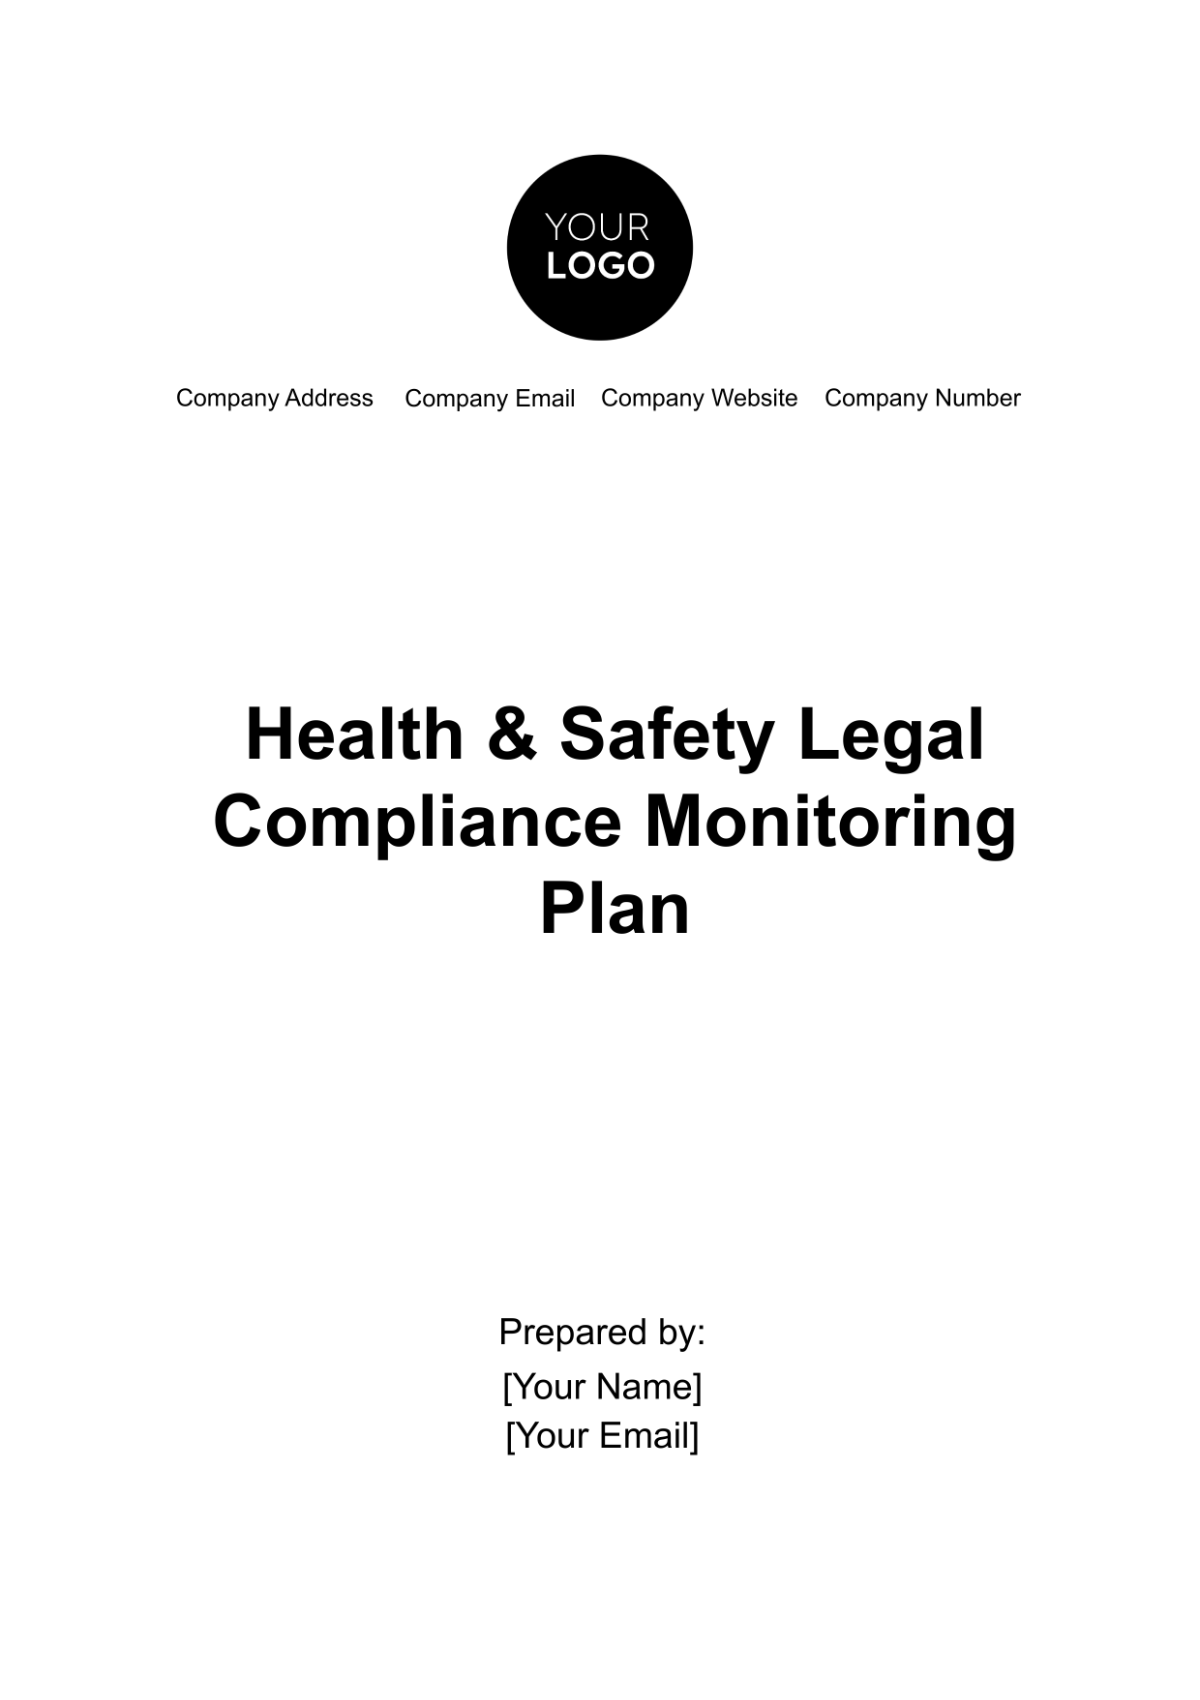 Health & Safety Legal Compliance Monitoring Plan Template